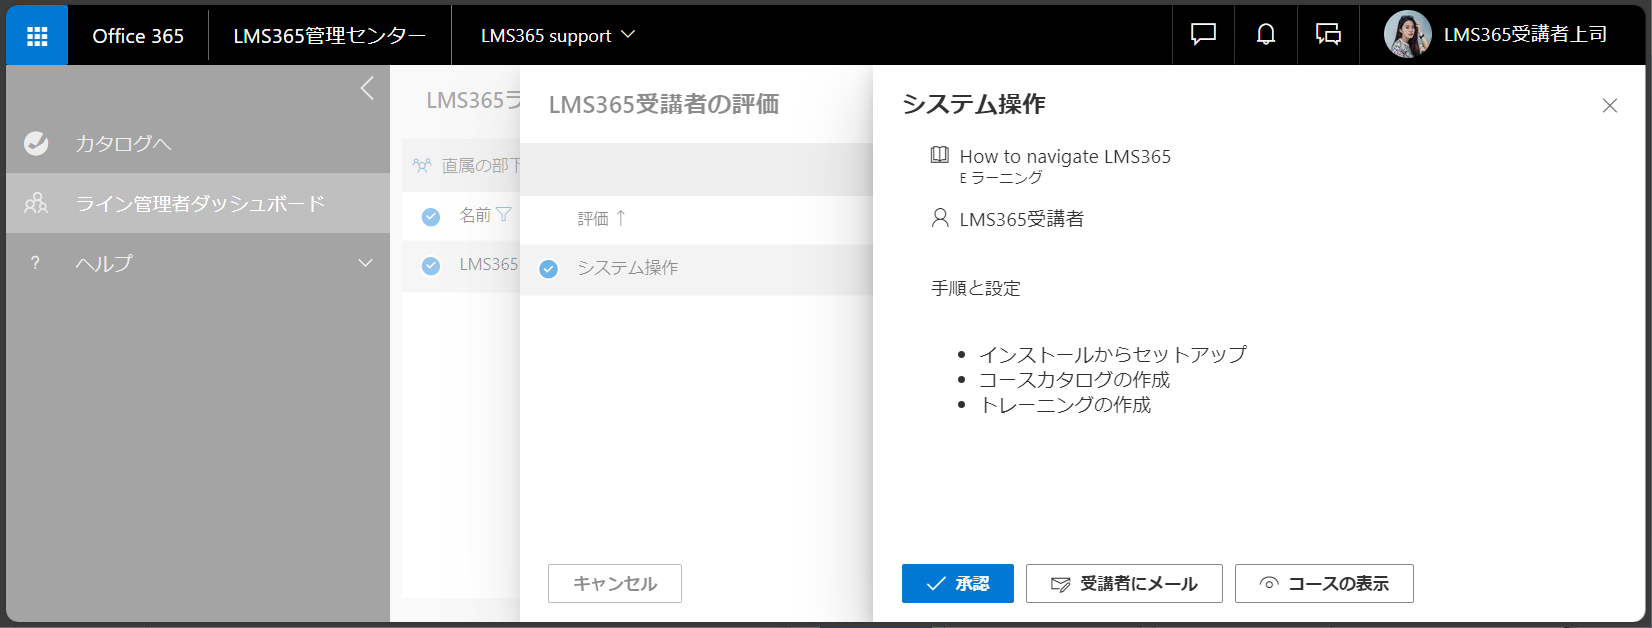 Line Manager Dashboard_User administration15.png